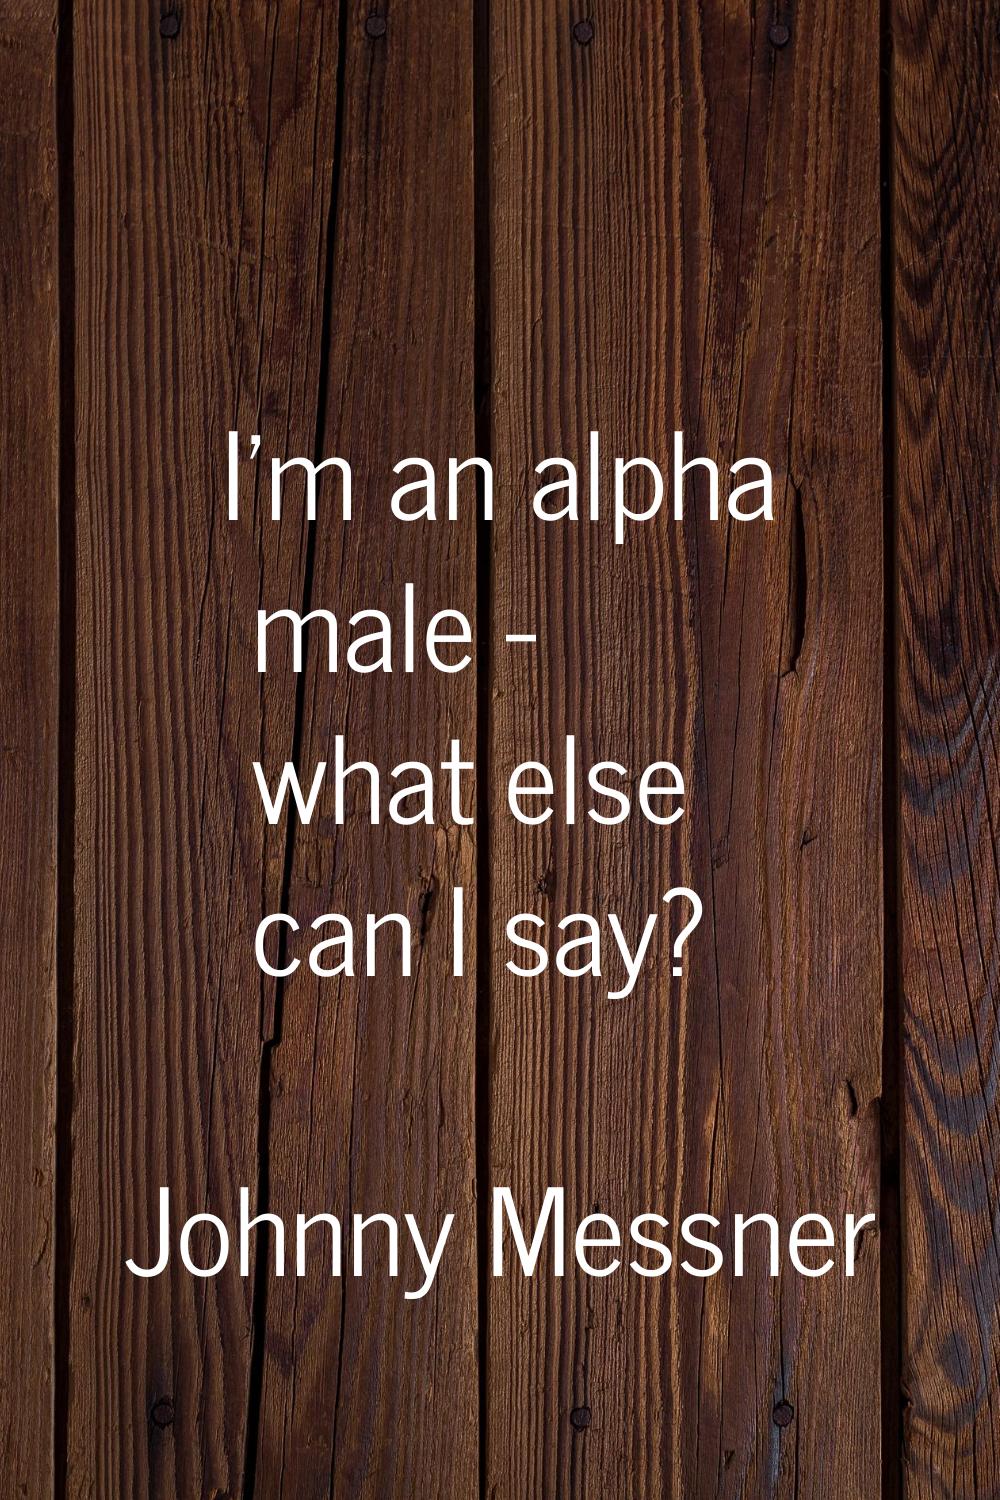 I'm an alpha male - what else can I say?